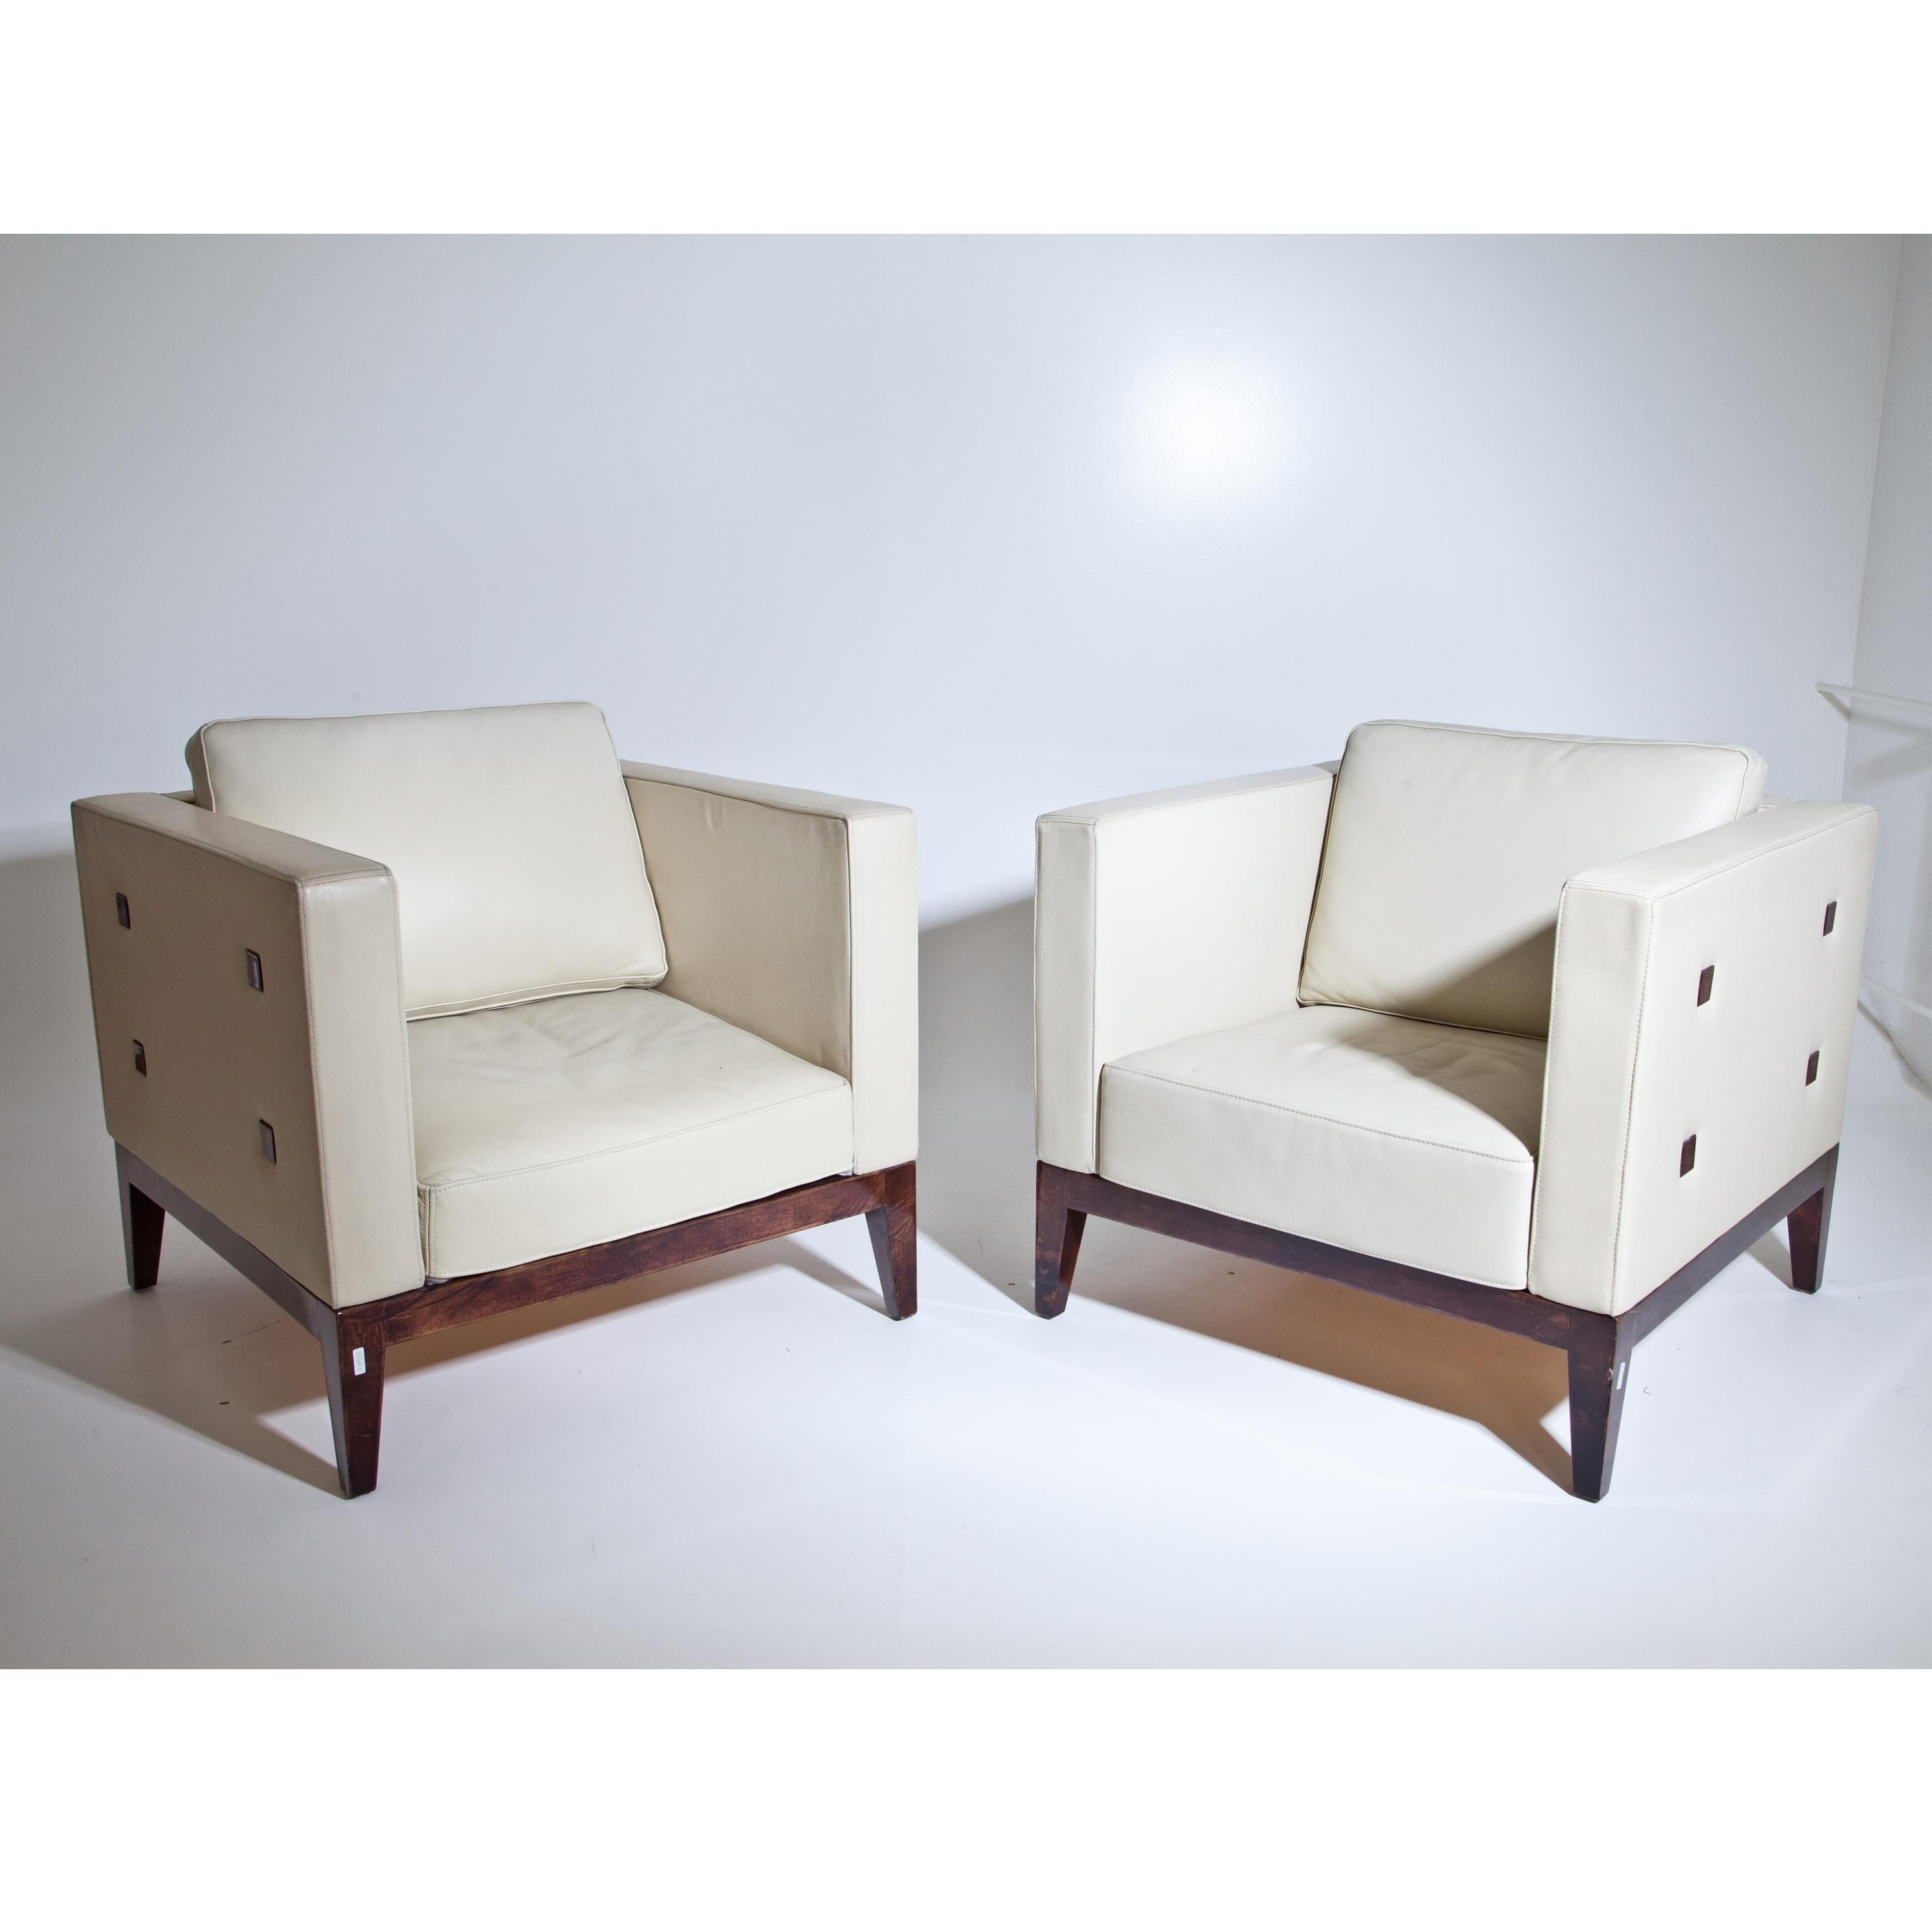 Pair of Aldo Tura Cubo lounge chairs on square legs with straight frame and beige leather upholstery. The frame is covered with brown goatskin and clear lacquer.